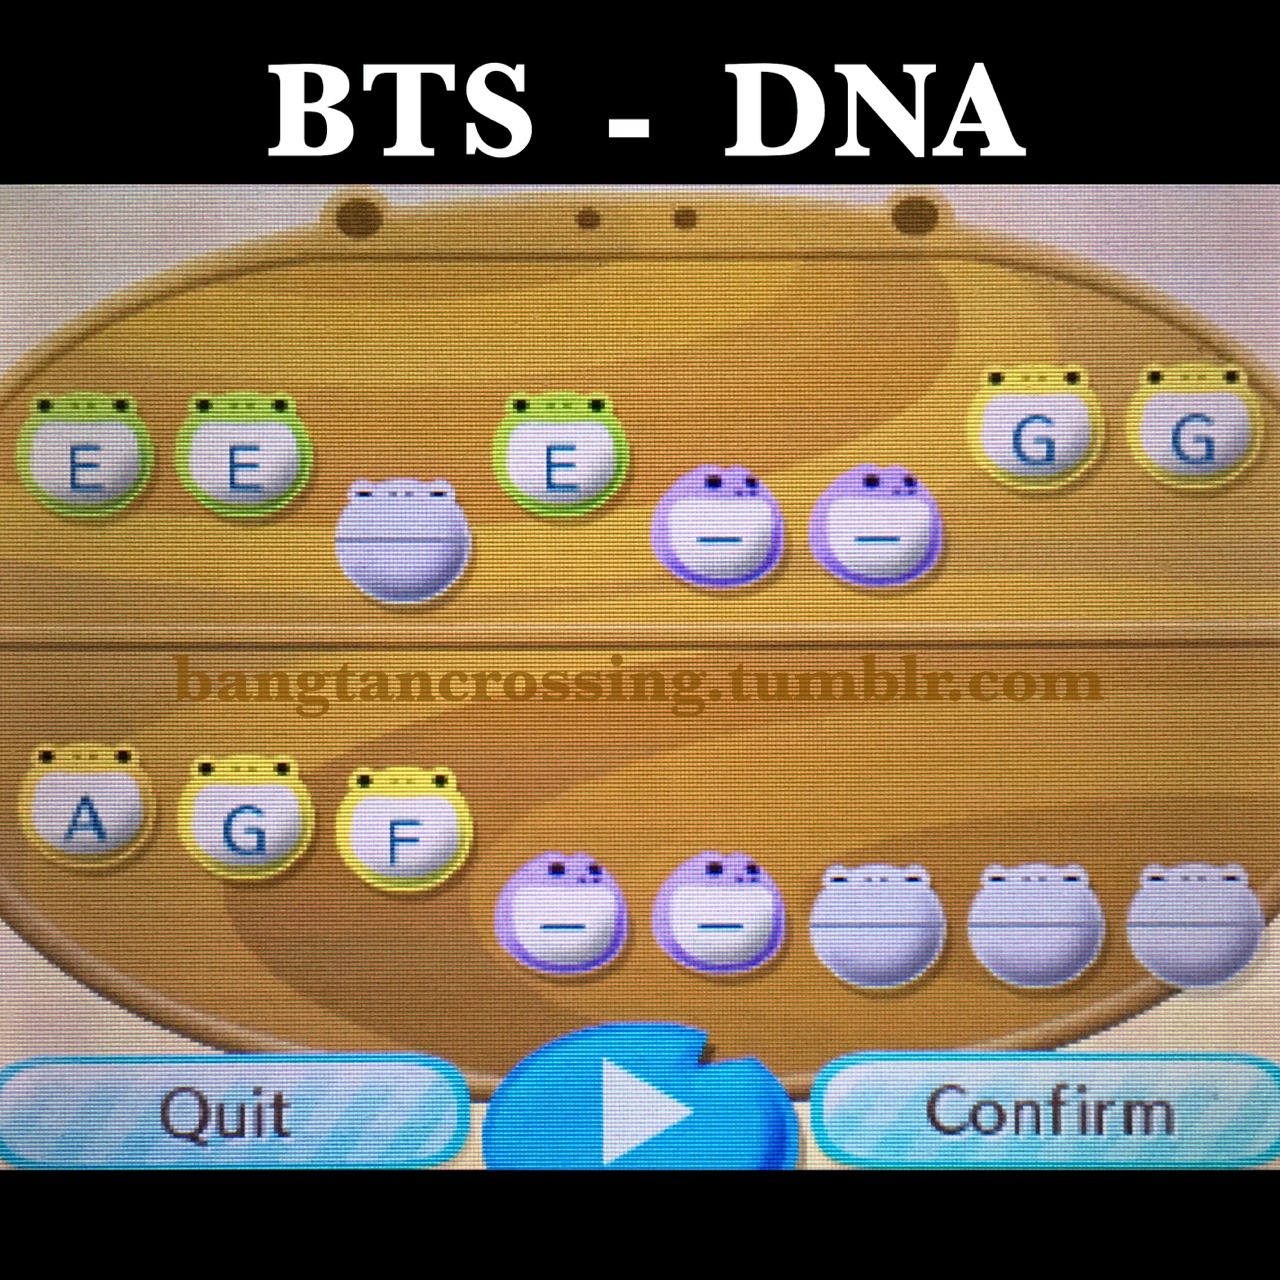 Dna Bts Animal Crossing - bts dna code for roblox